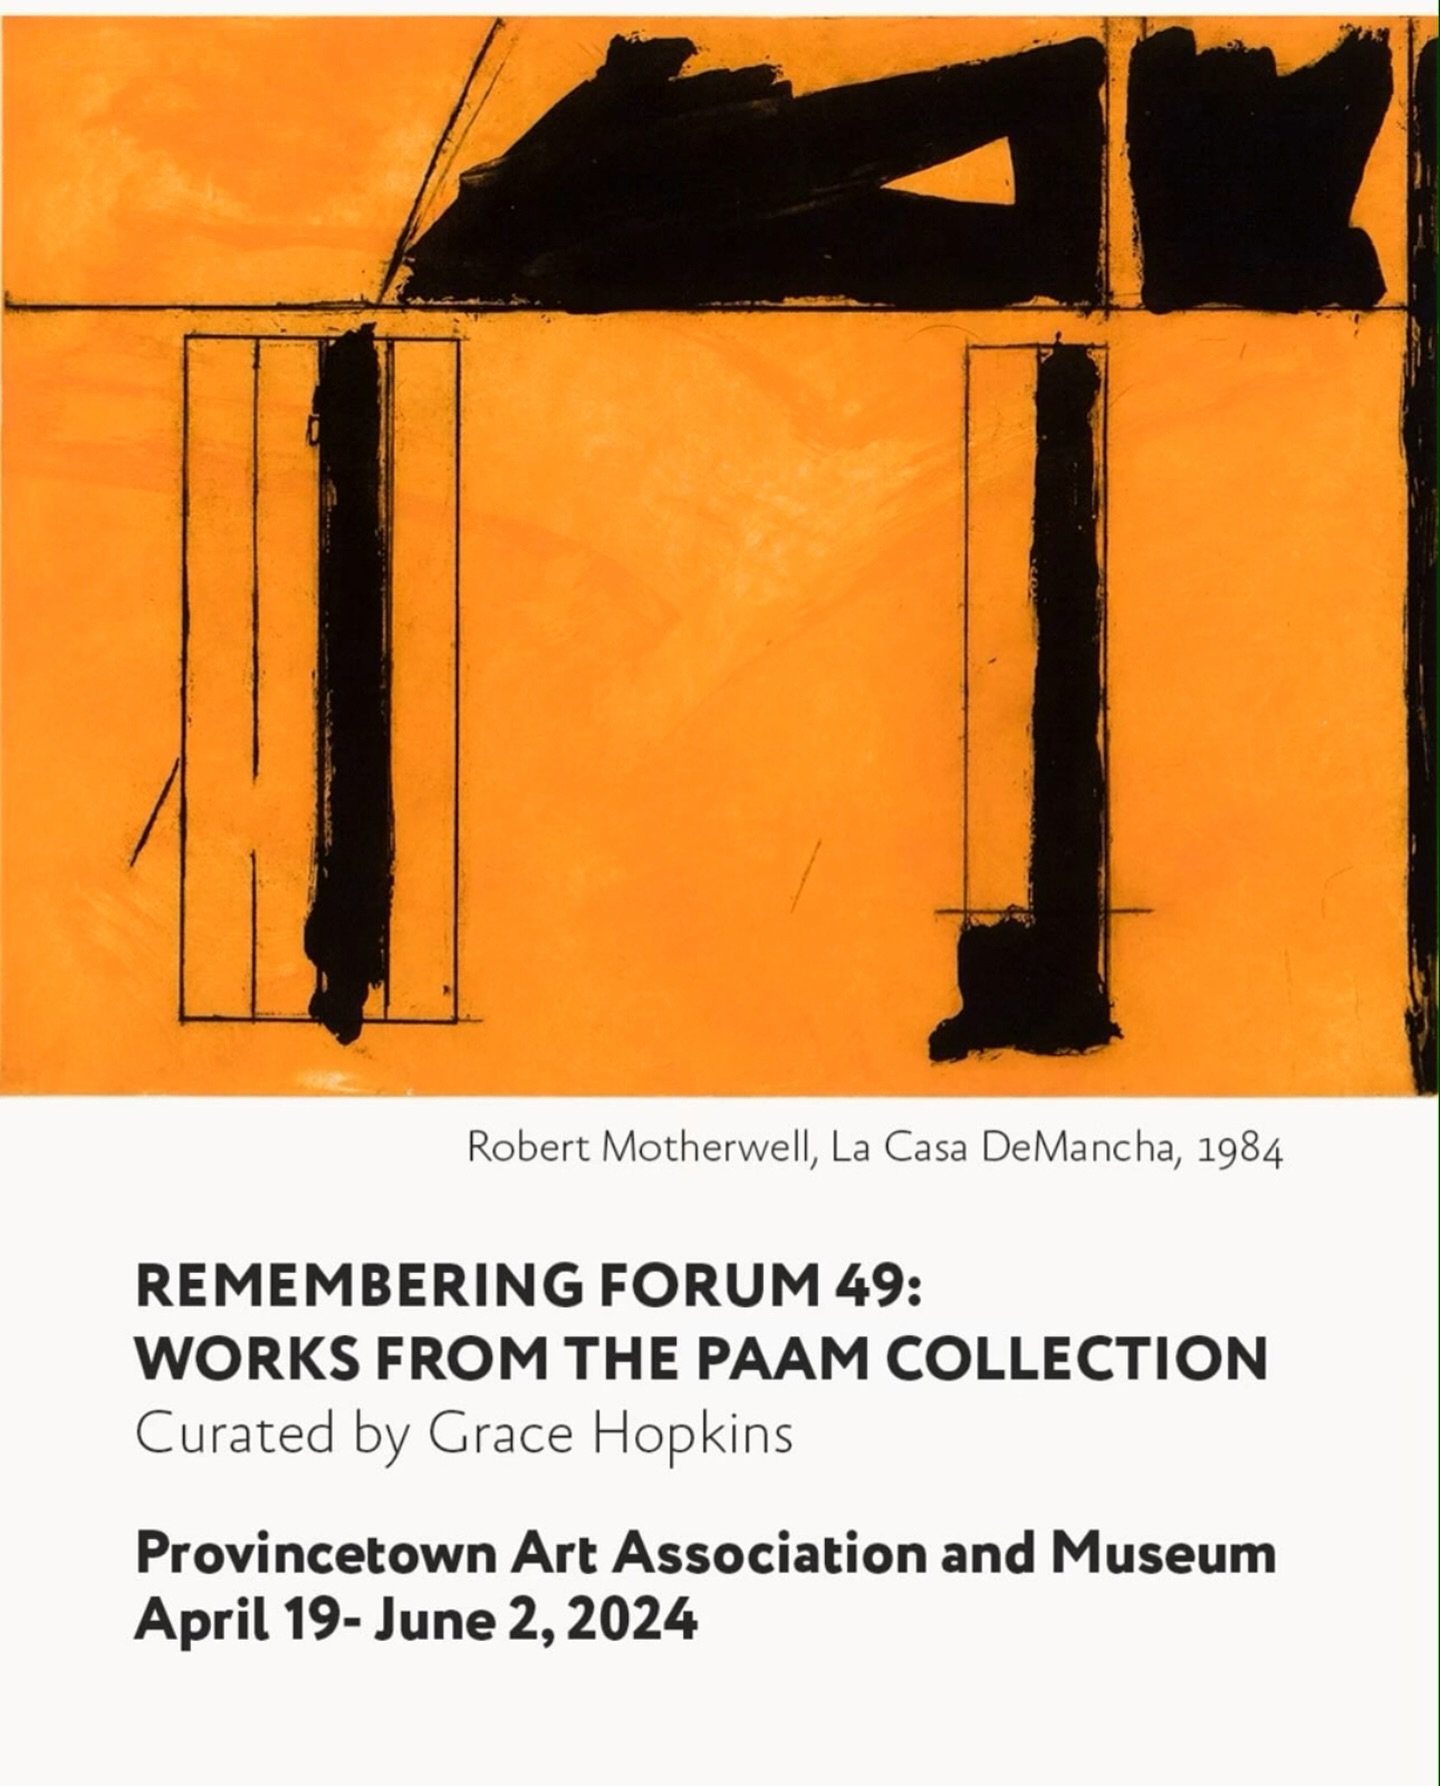 REMEMBERING FORUM 49: WORKS FROM THE PAAM COLLECTION curated by Grace Hopkins, opens to the public THIS FRIDAY, April 19th at noon, with an opening reception from 6-8pm, at @paam1914 

This exhibition will include works from PAAM&rsquo;s permanent co